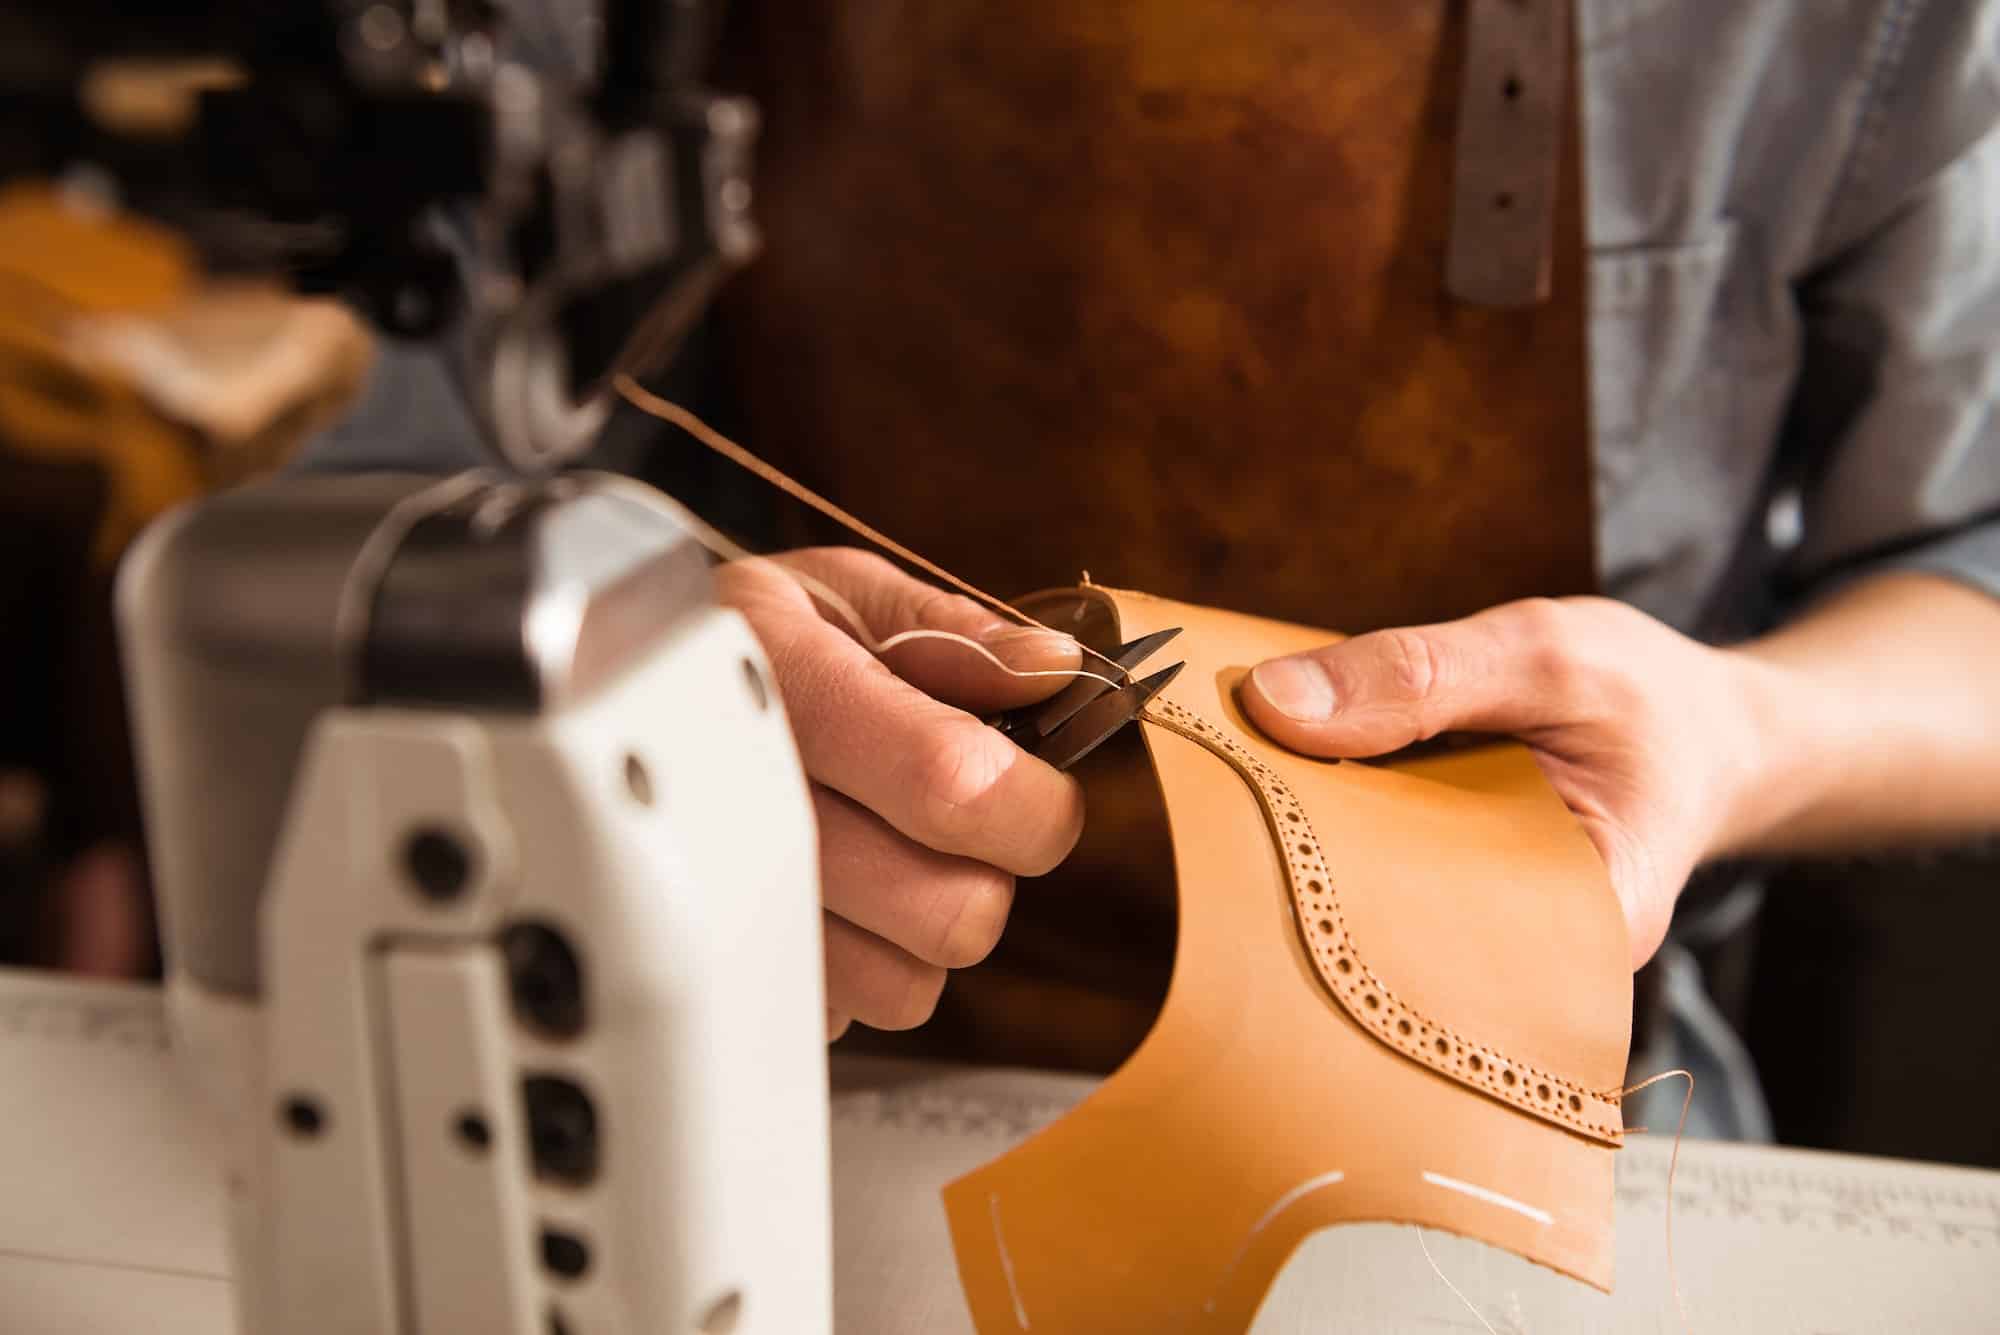 Man artisan sewing leather shoes indoors